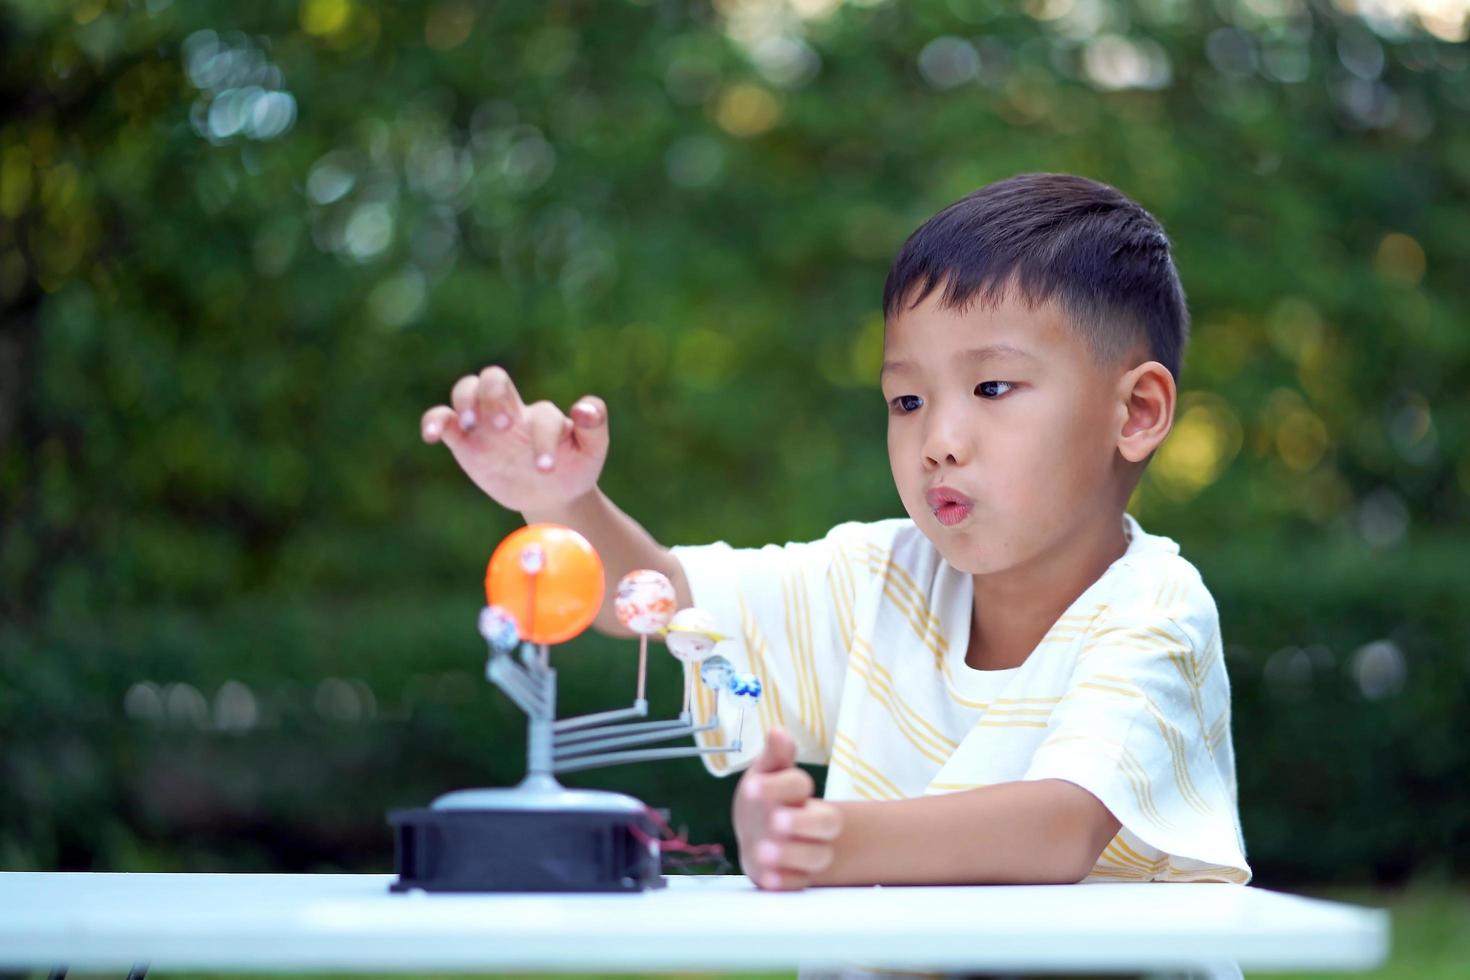 Asian boy Living Solar System Toys, Home Learning Equipment, during new normal change after coronavirus or post covid-19 outbreak pandemic situation photo